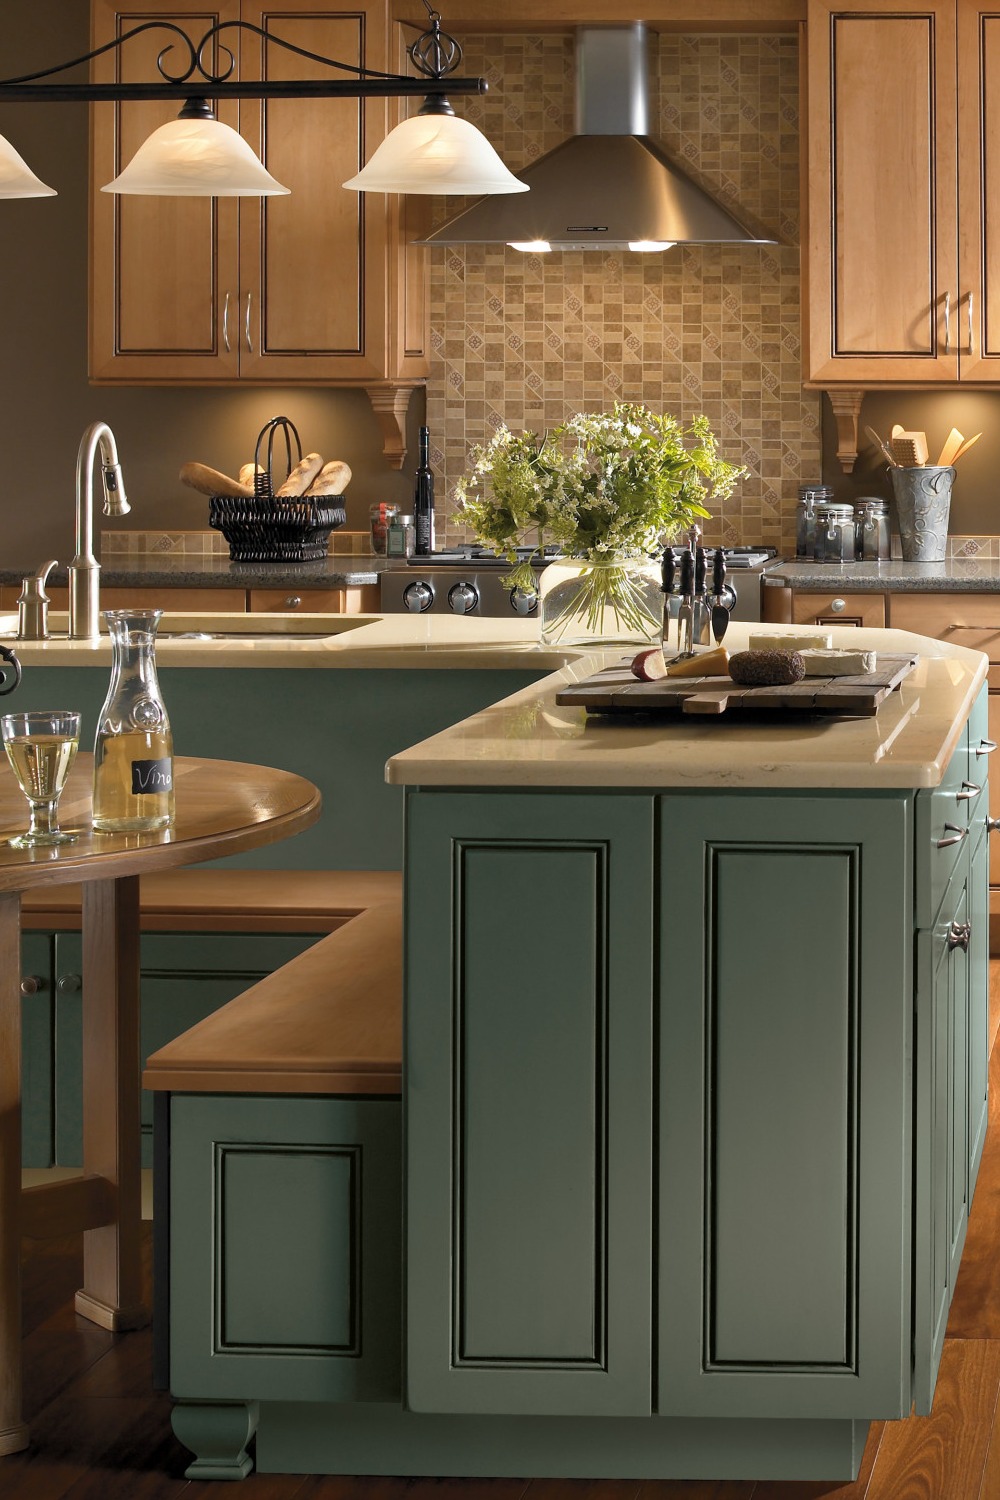 Eclectic Style Fashion Eclectic Kitchens Decorating Styles